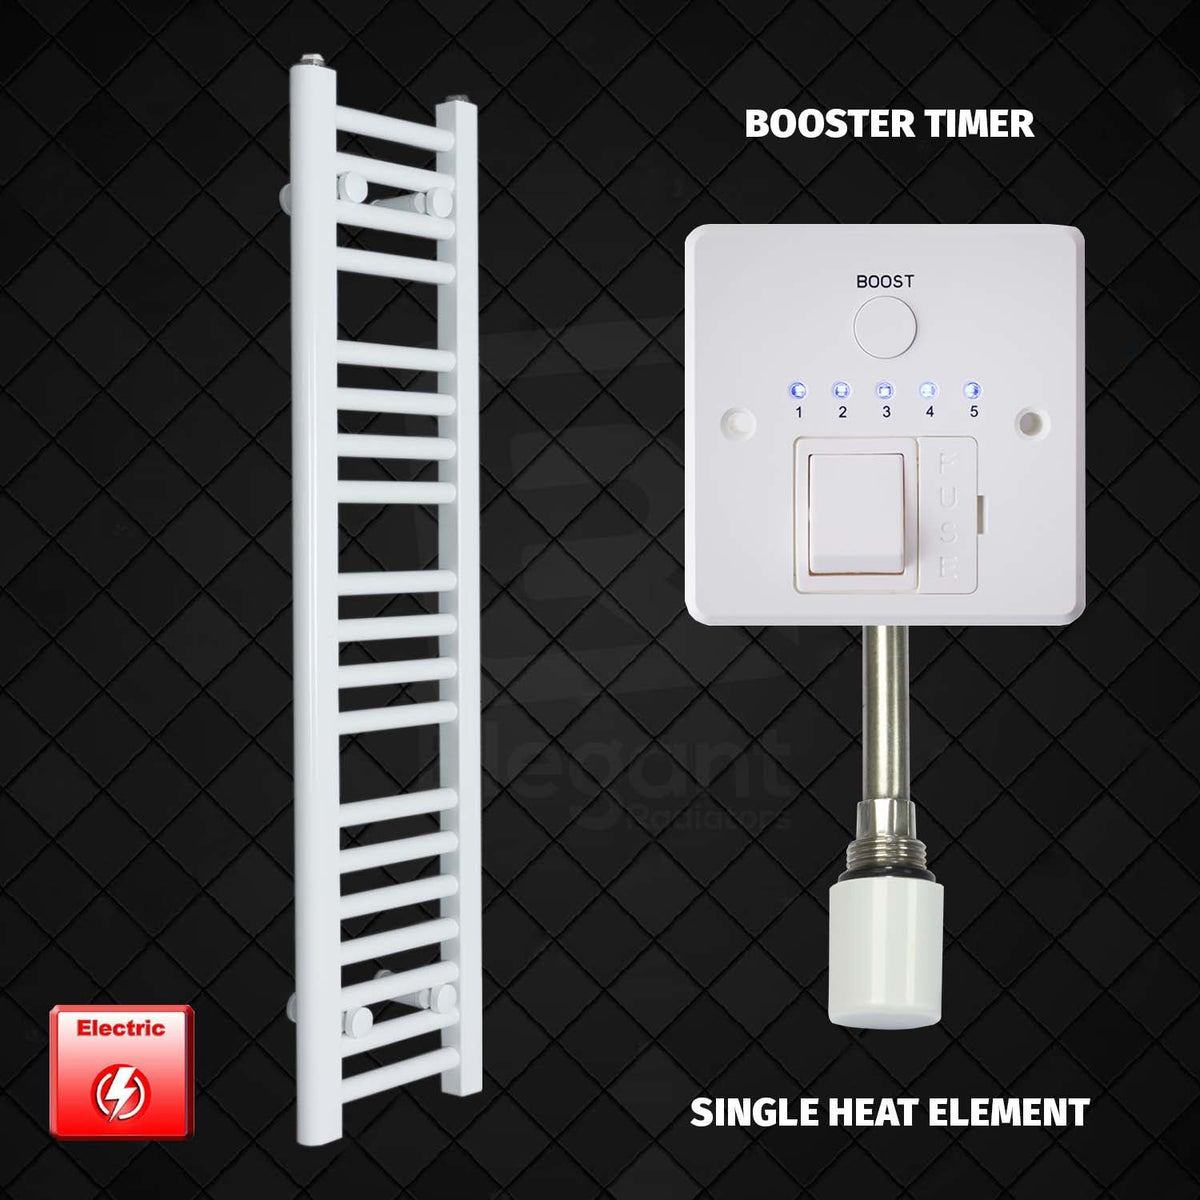 1000 x 250 Pre-Filled Electric Heated Towel Radiator White Booster Timer Single Heat Element